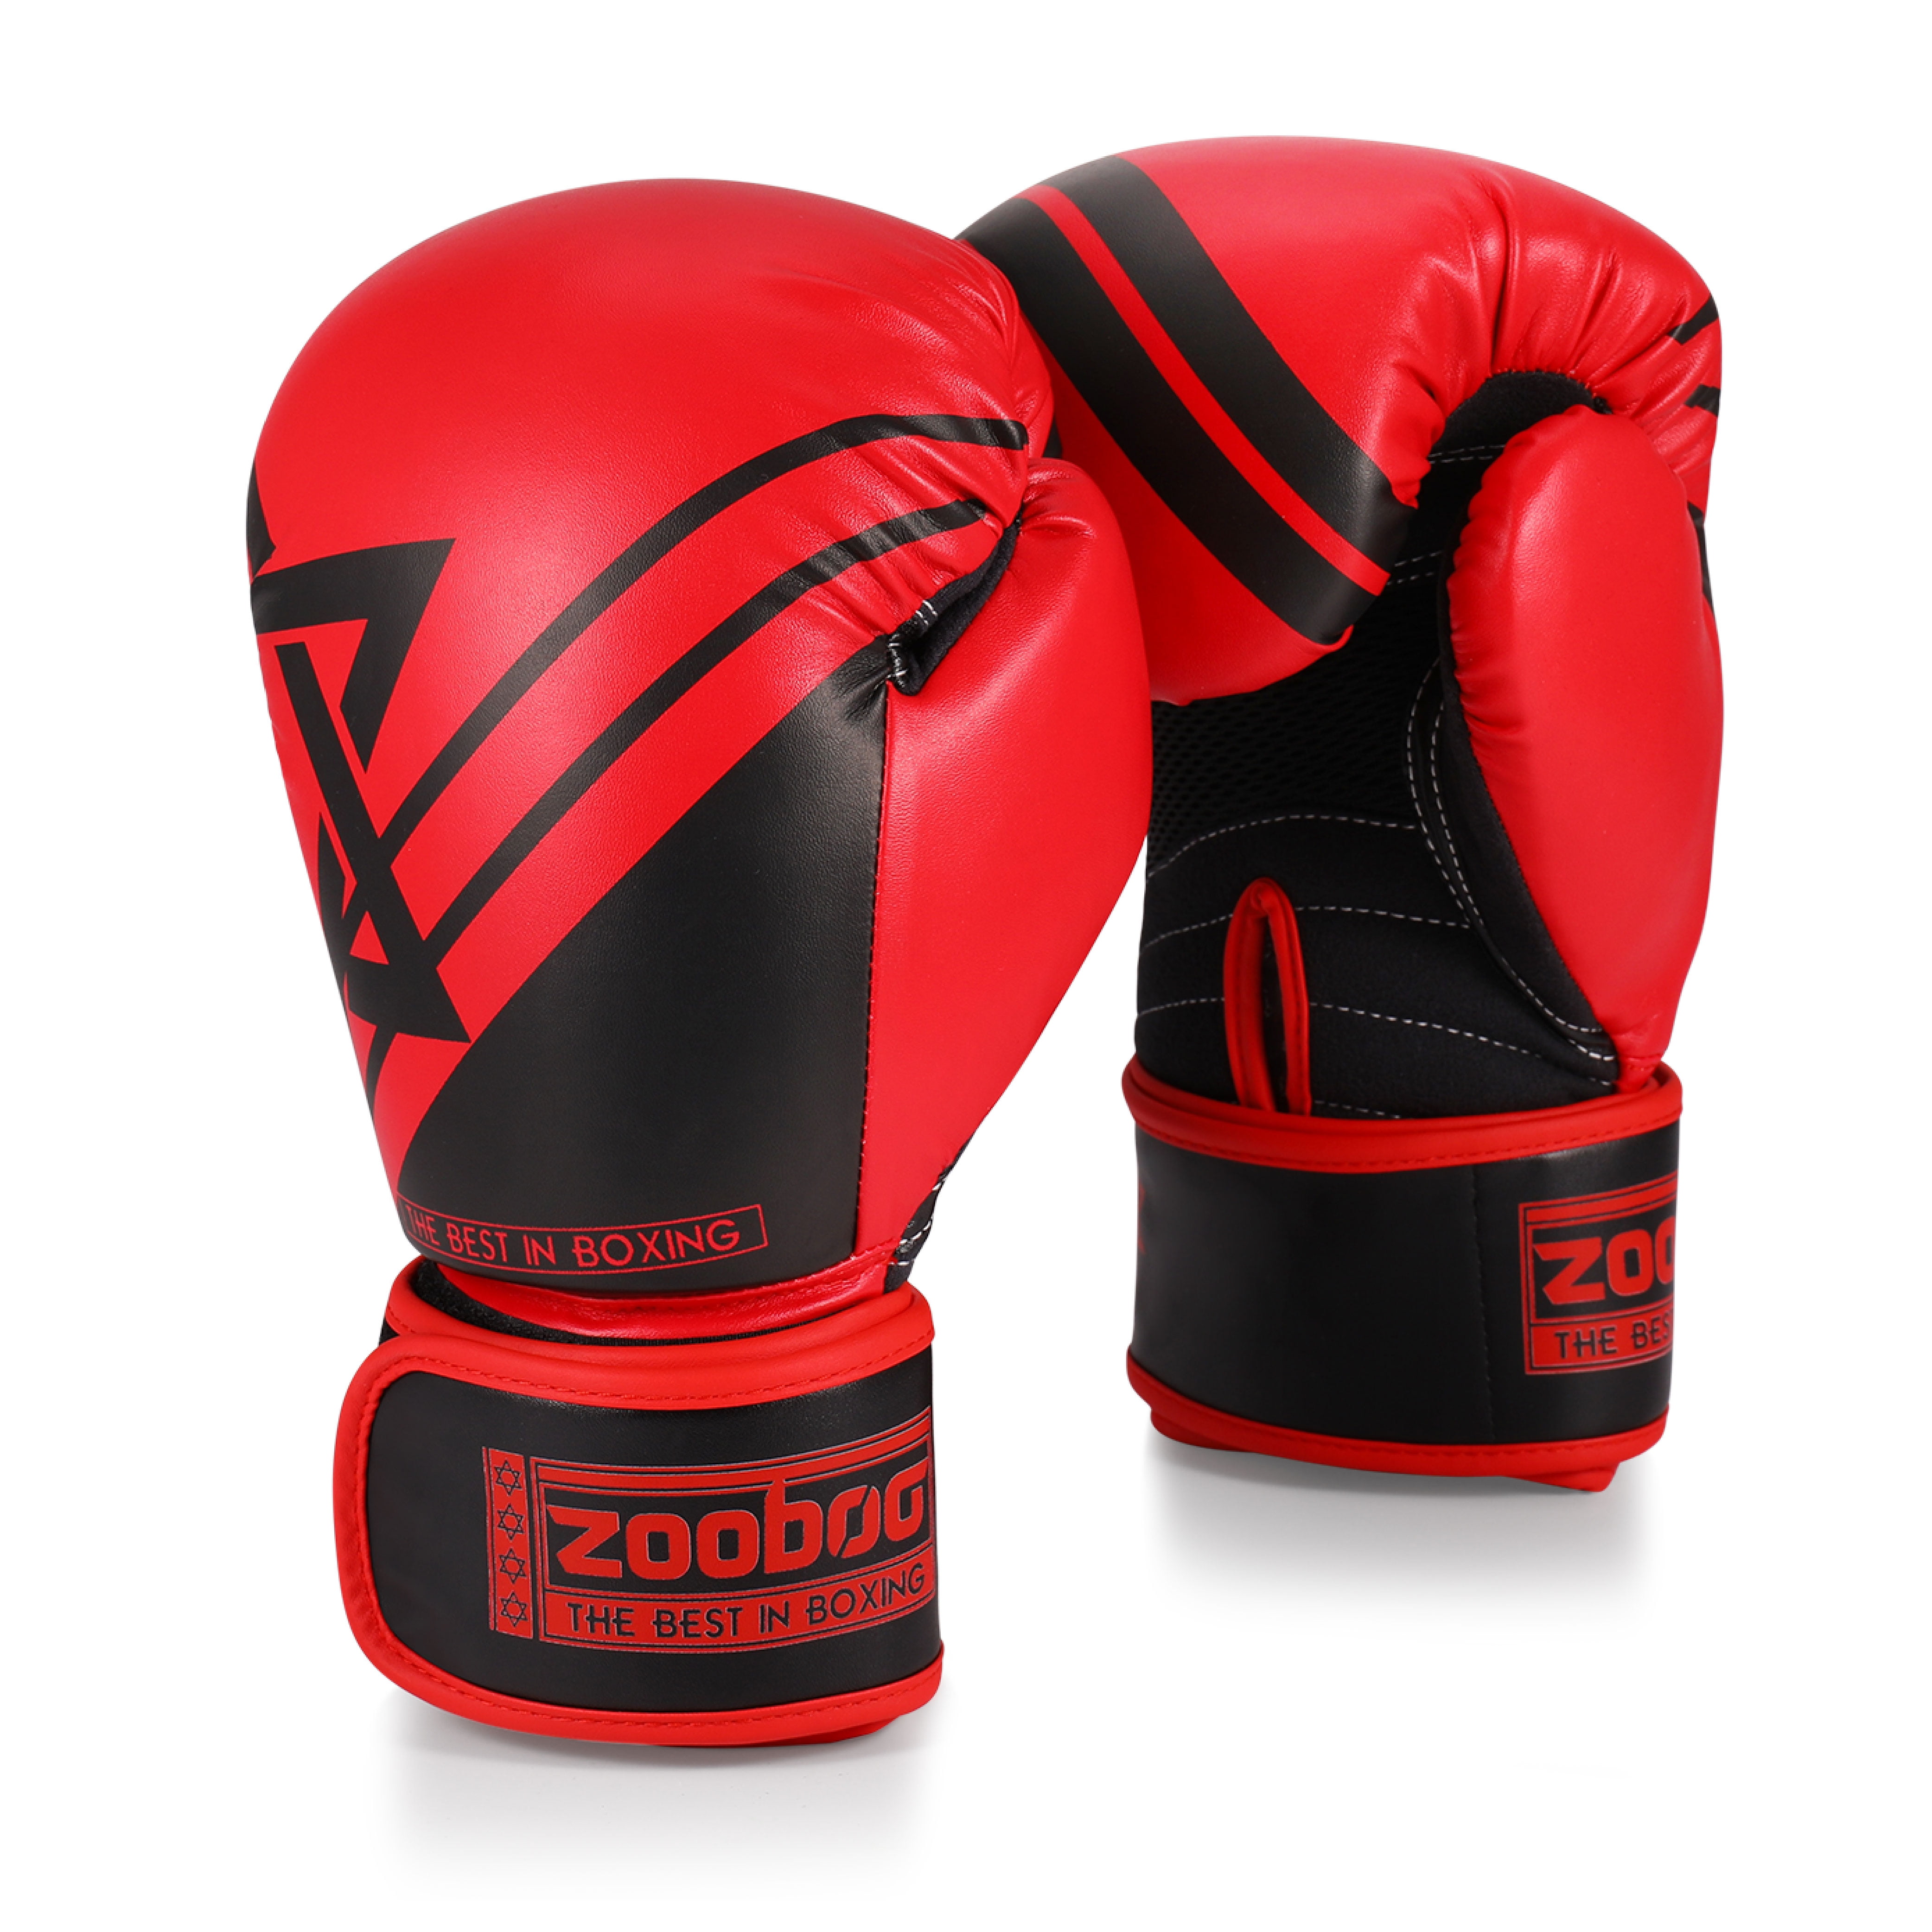 gemeenschap Zeeman Stoel 10 oz Boxing Gloves for Men, Youth, and Women, Red Boxing Gloves Punching  Bag Gloves 10oz Ounce for KickBoxing, MMA, Muay Thai, Training, Sparing,  Bagwork with Wrist Wrap - Walmart.com